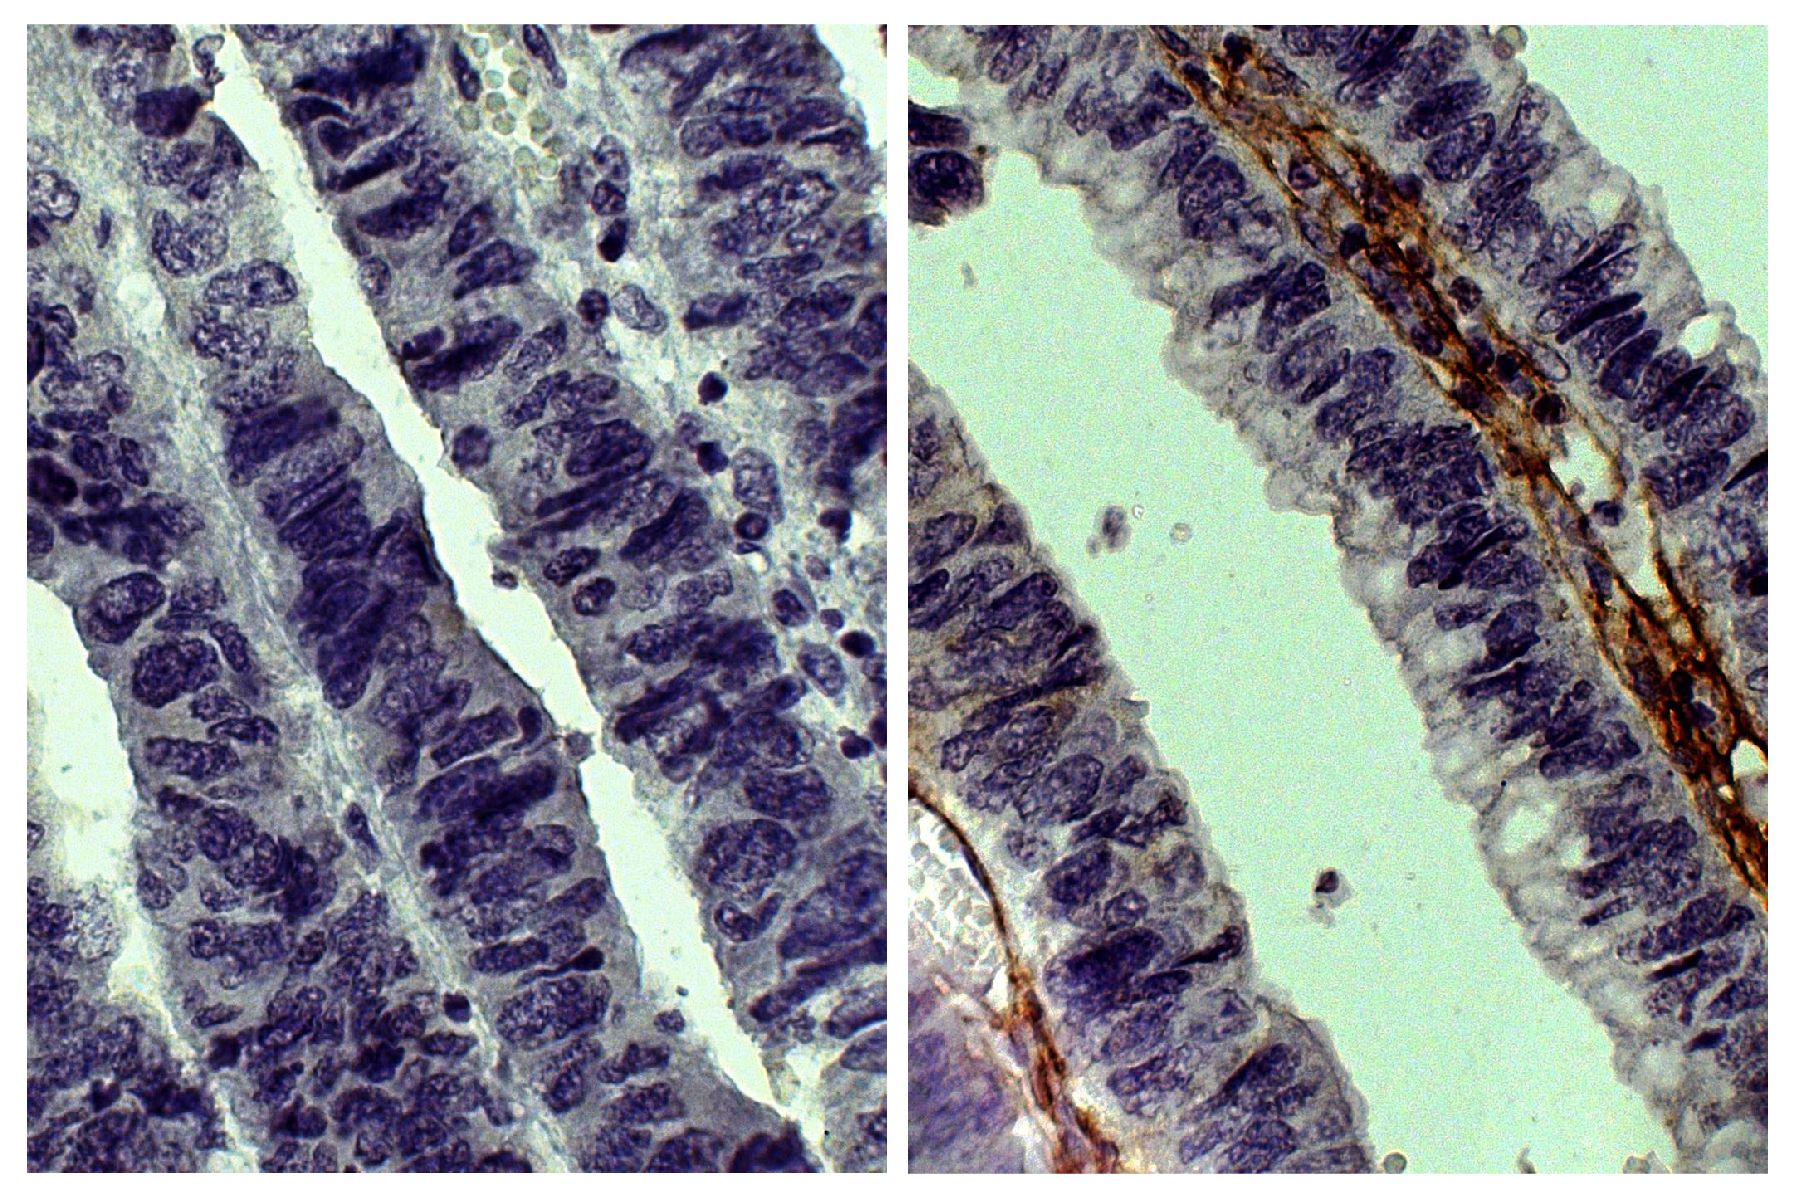 Paraffin embedded human gastric cancer tissue was stained with Goat IgG-UNLB isotype control (SB Cat. No. 0109-01; left) and Goat Anti-Type III Collagen-UNLB (SB Cat. No. 1330-01; right) followed by Swine Anti-Goat IgG(H+L), Human/Rat/Mouse SP ads-HRP (SB Cat. No. 6300-05), DAB, and hematoxylin.